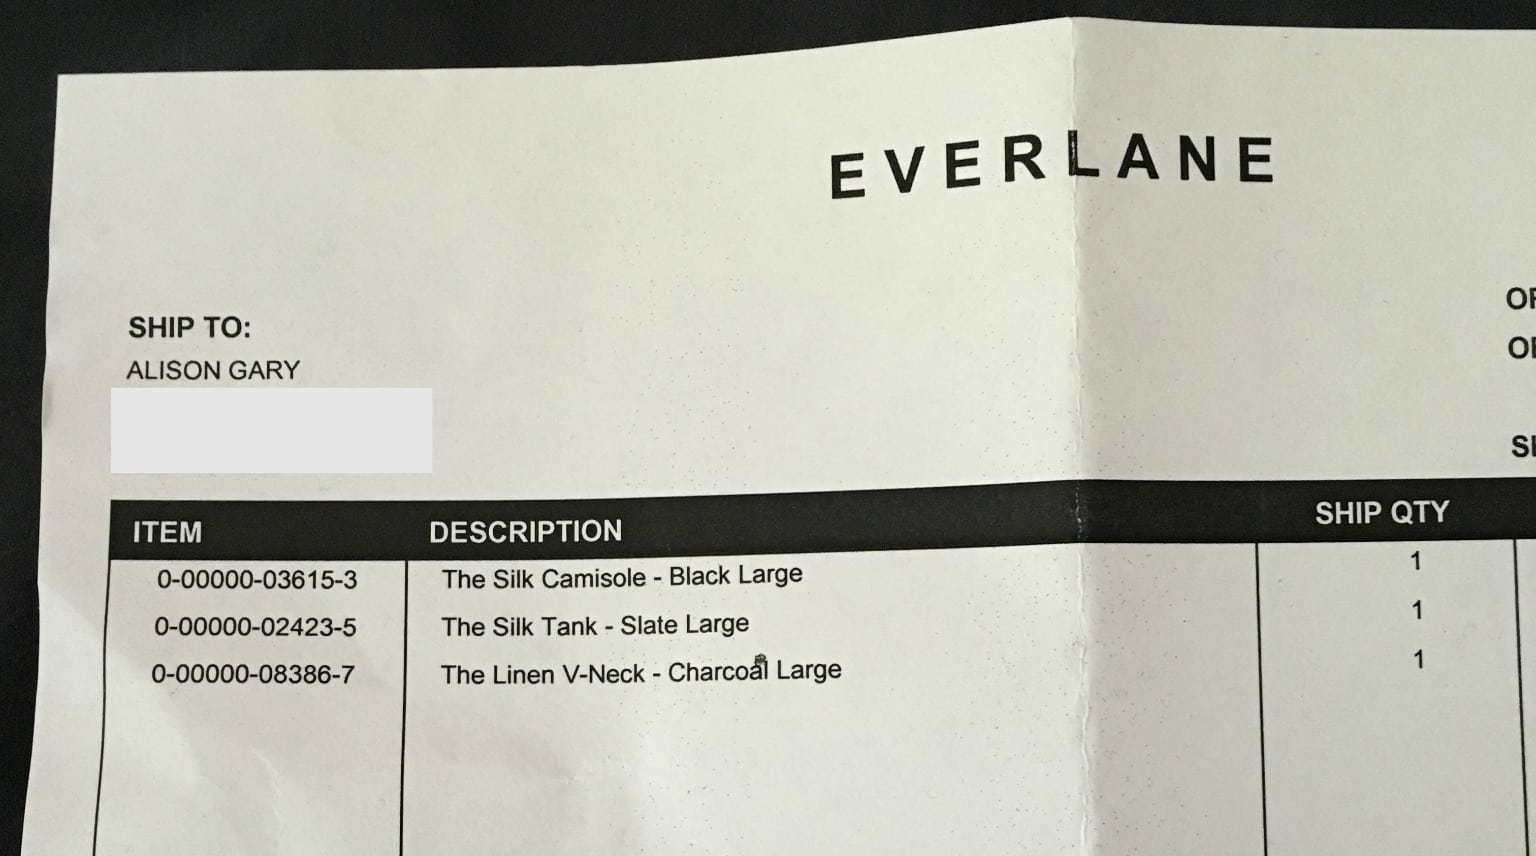 Everlane Sizing: Can a Size 14 Woman 